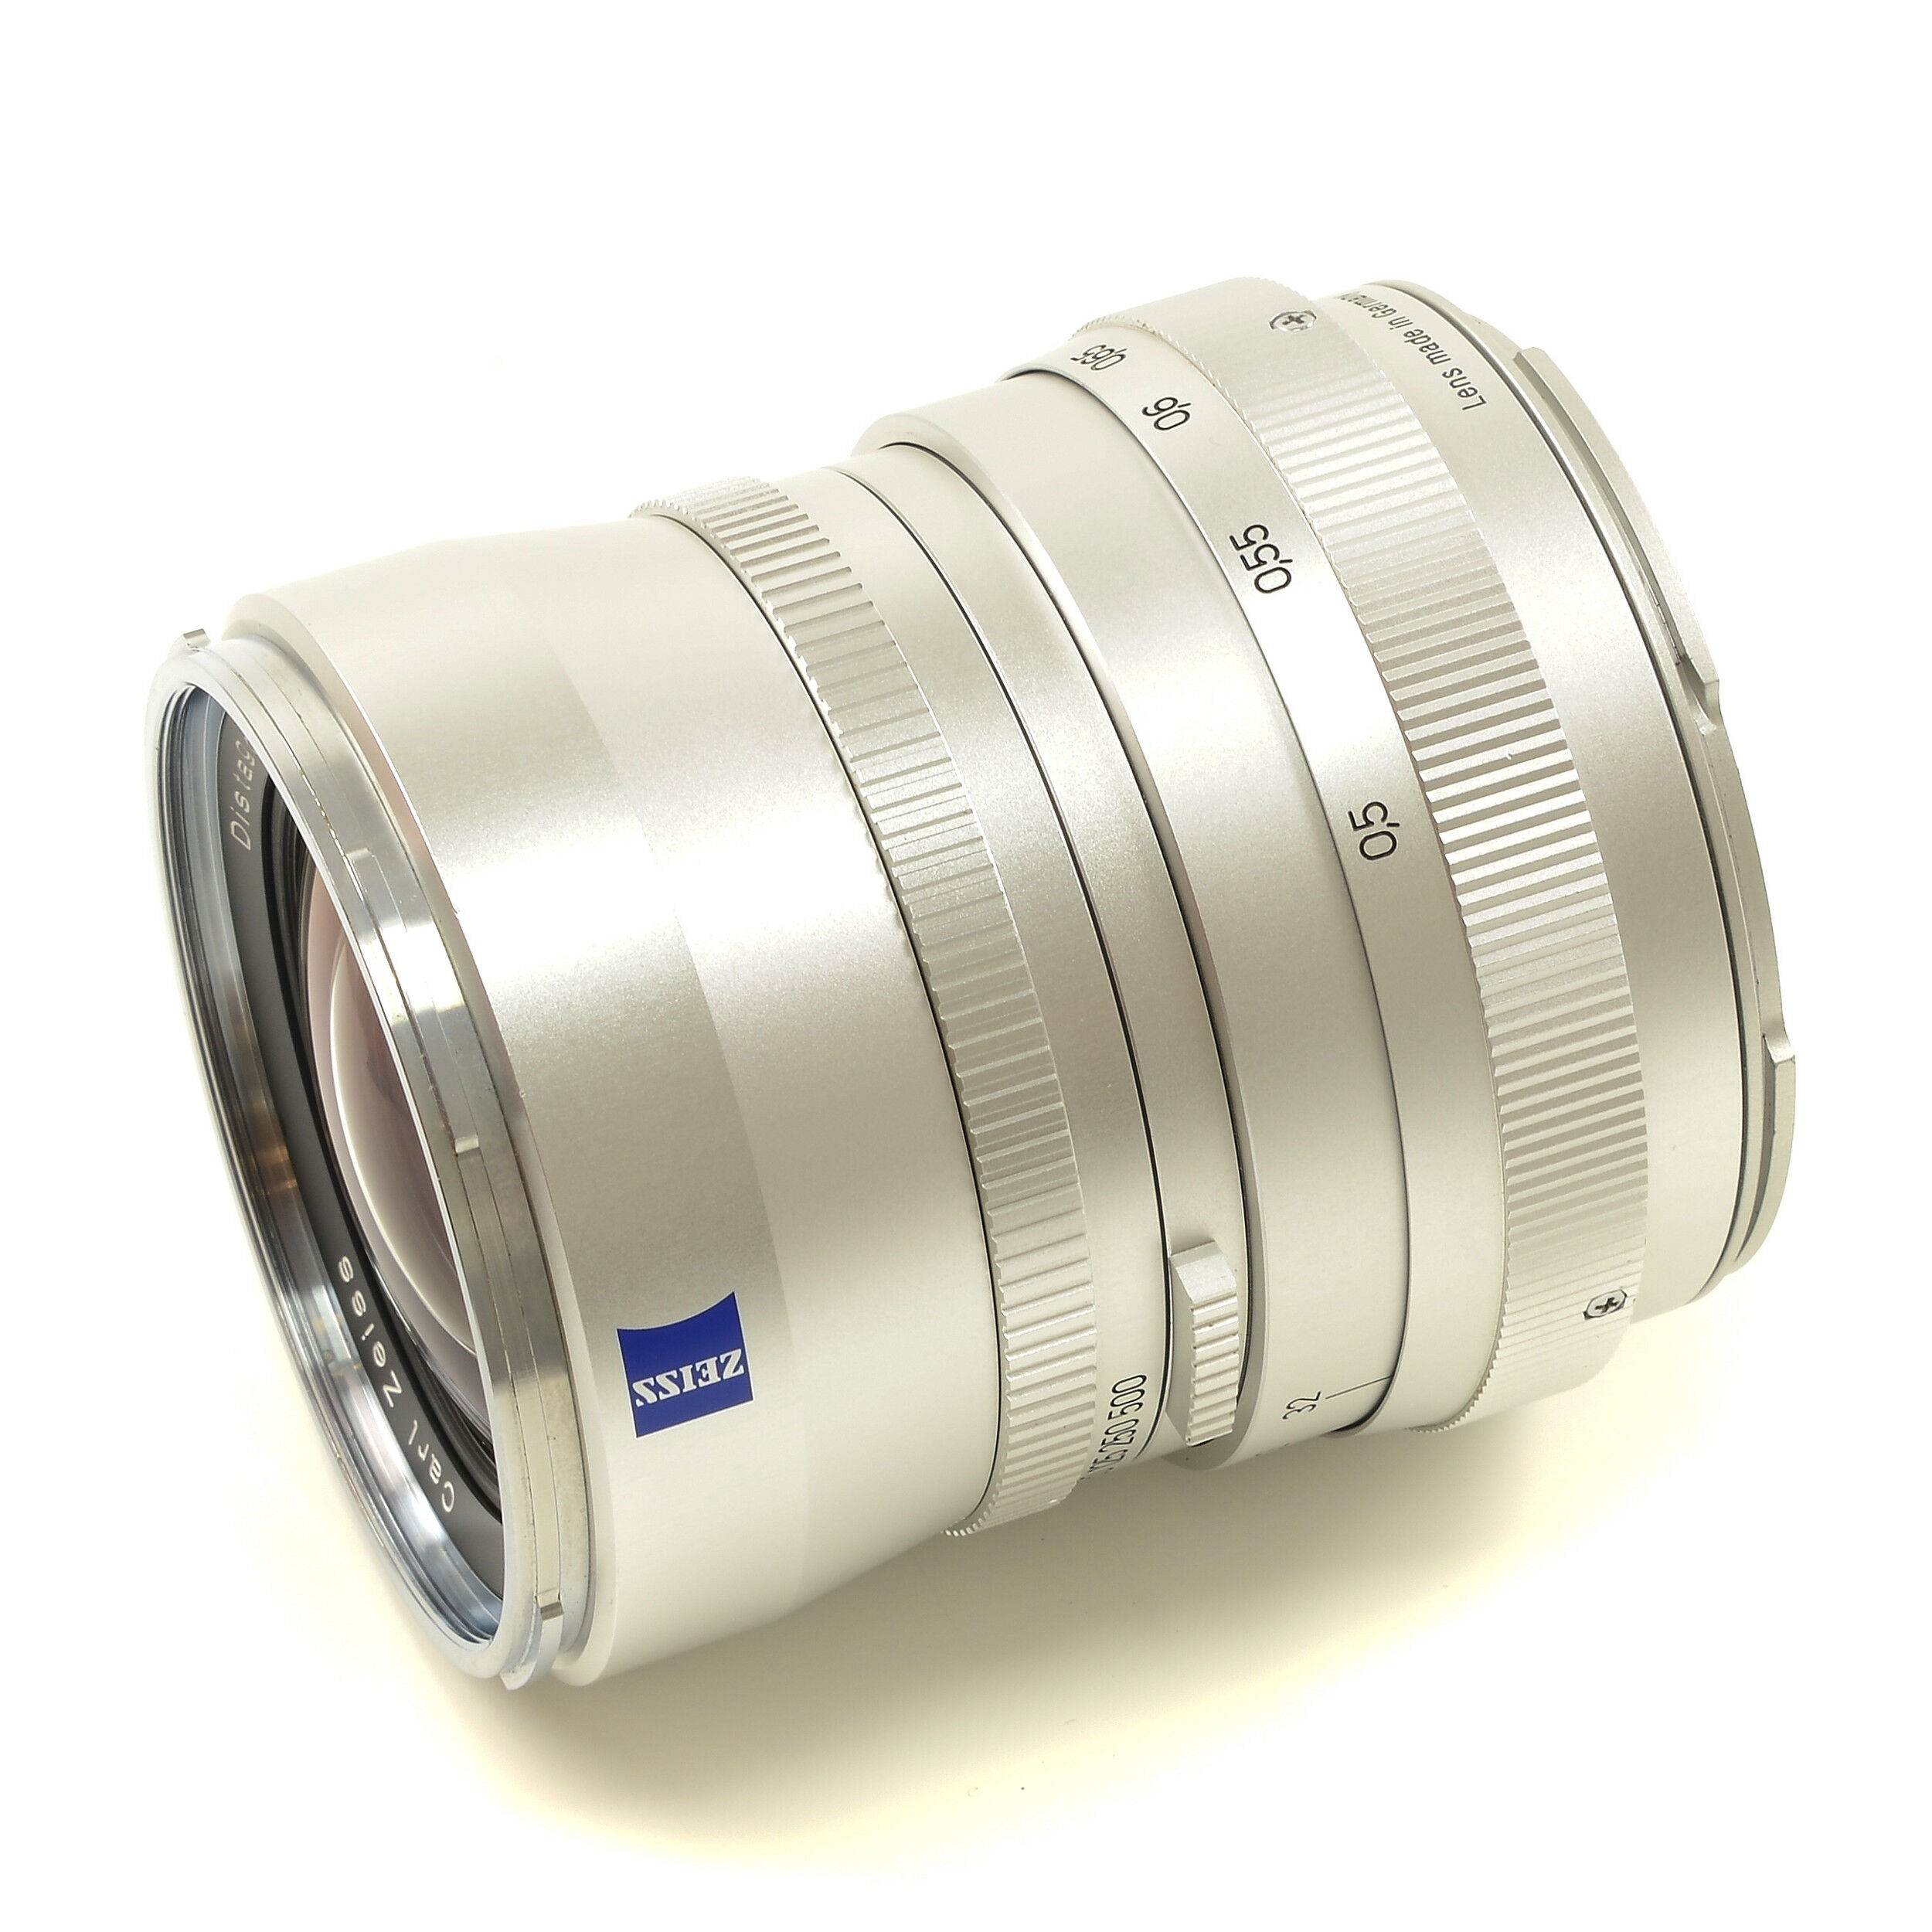 CARL ZEISS 50MM F4 DISTAGON ZV CLASSIC EDITION PROTOTYPE FOR HASSELBLAD V SYSTEM